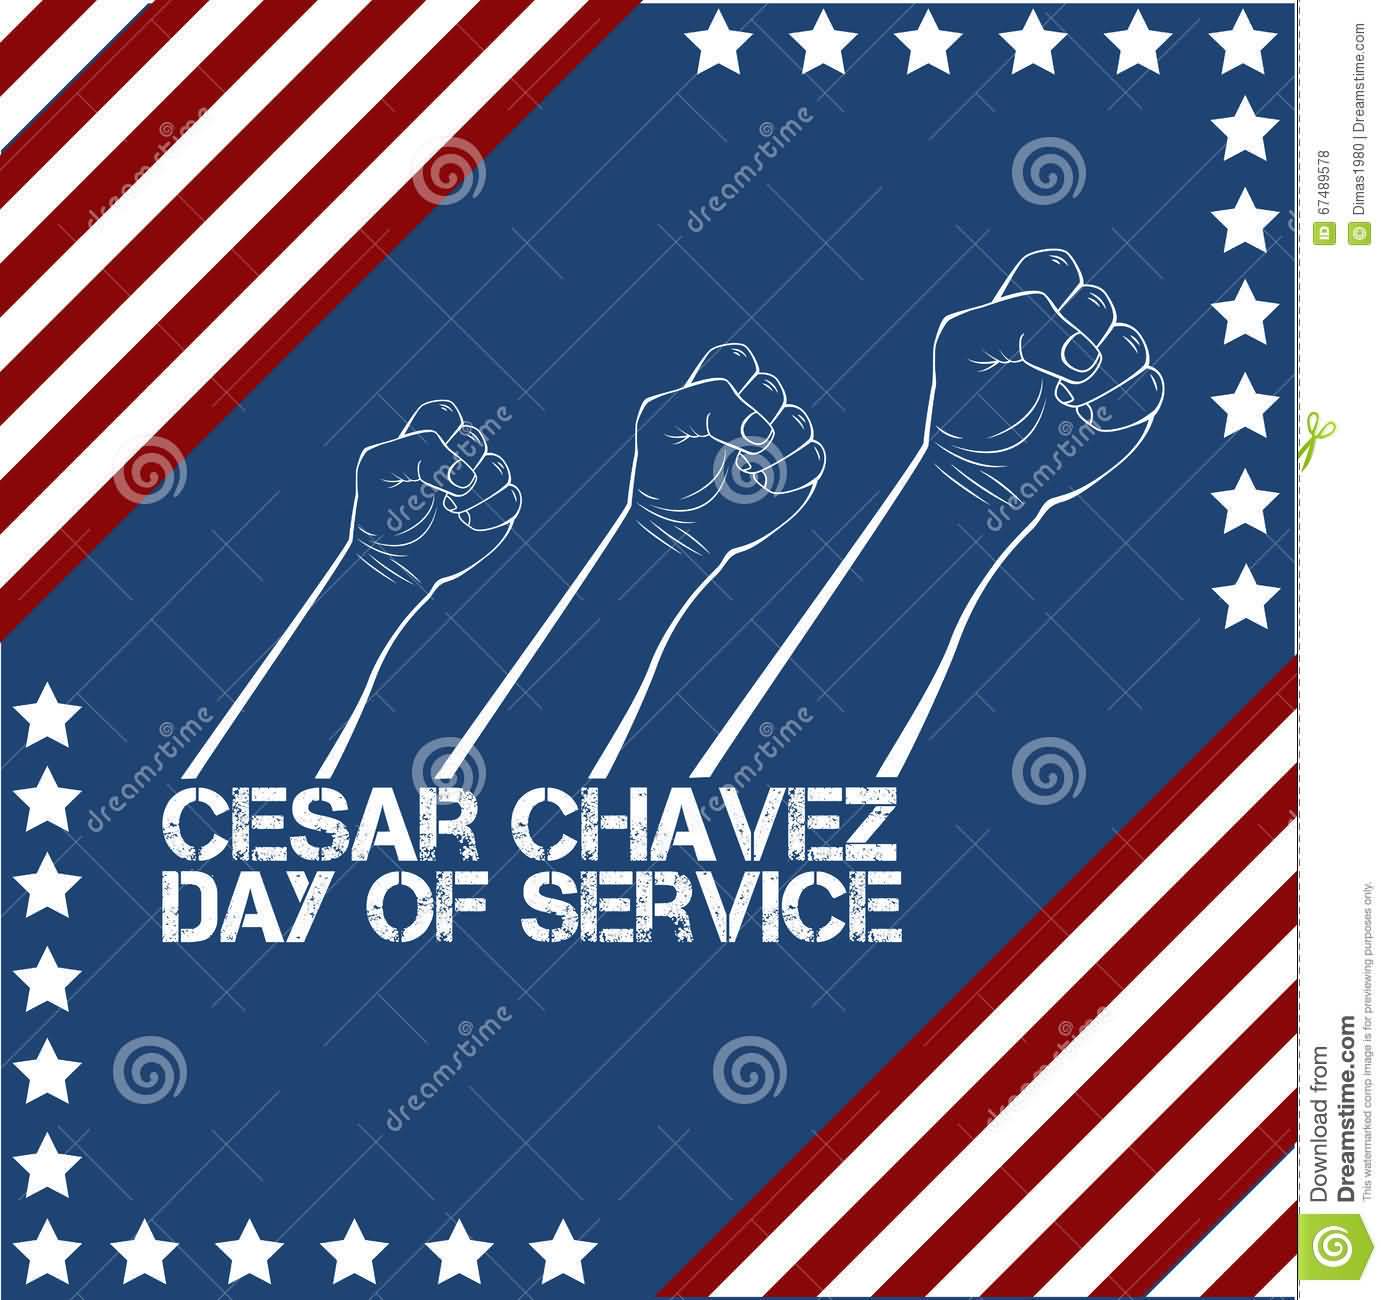 Cesar Chavez Day Of Service Fists And American Flag Illustration